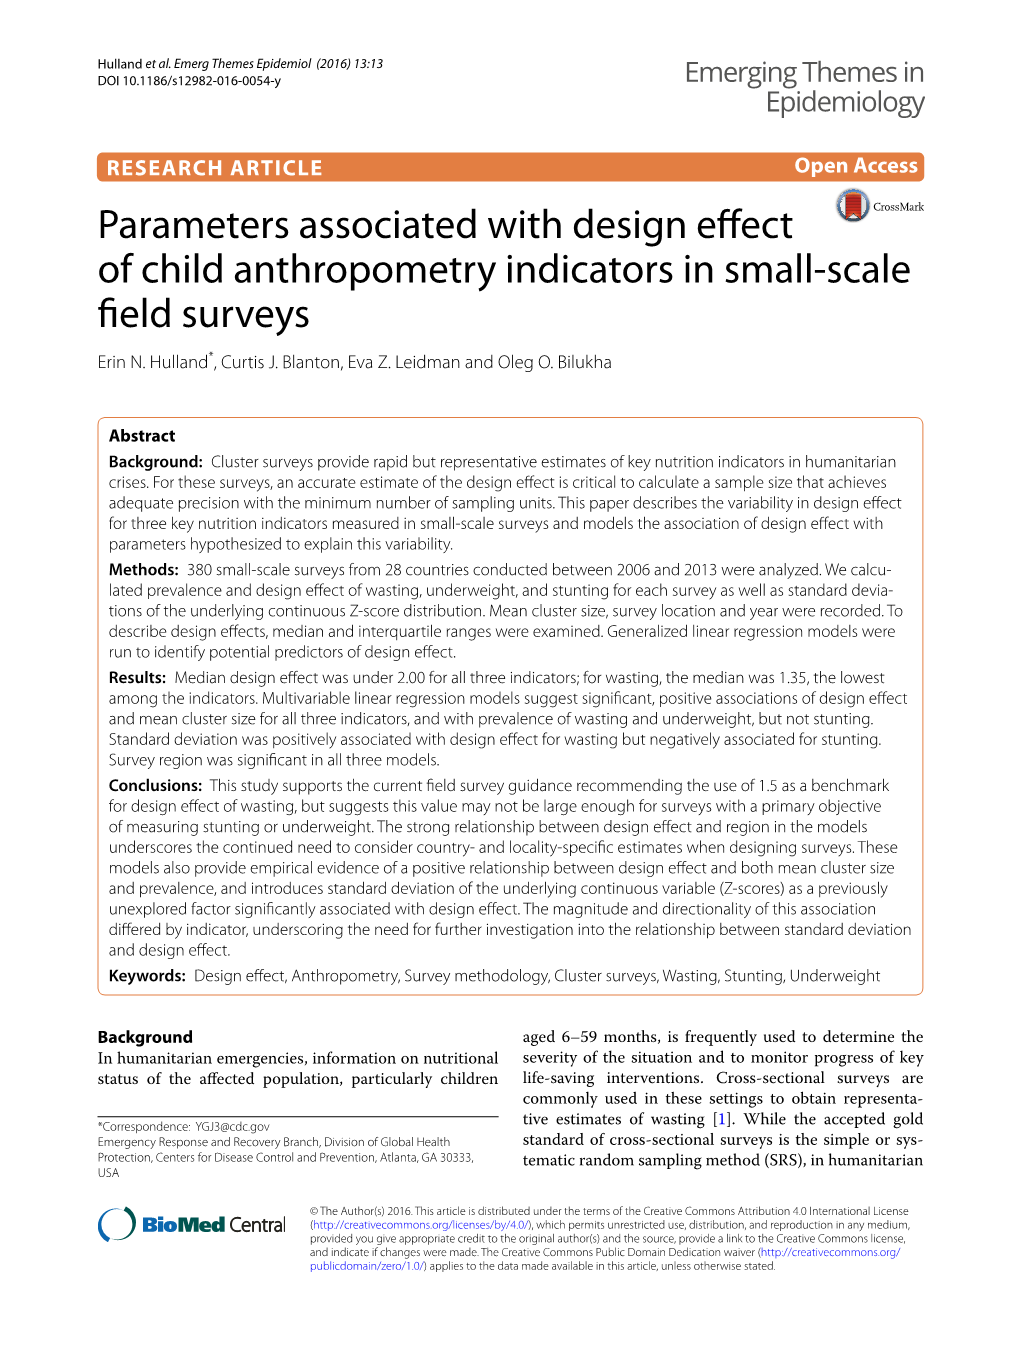 Parameters Associated with Design Effect of Child Anthropometry Indicators in Small‑Scale Field Surveys Erin N